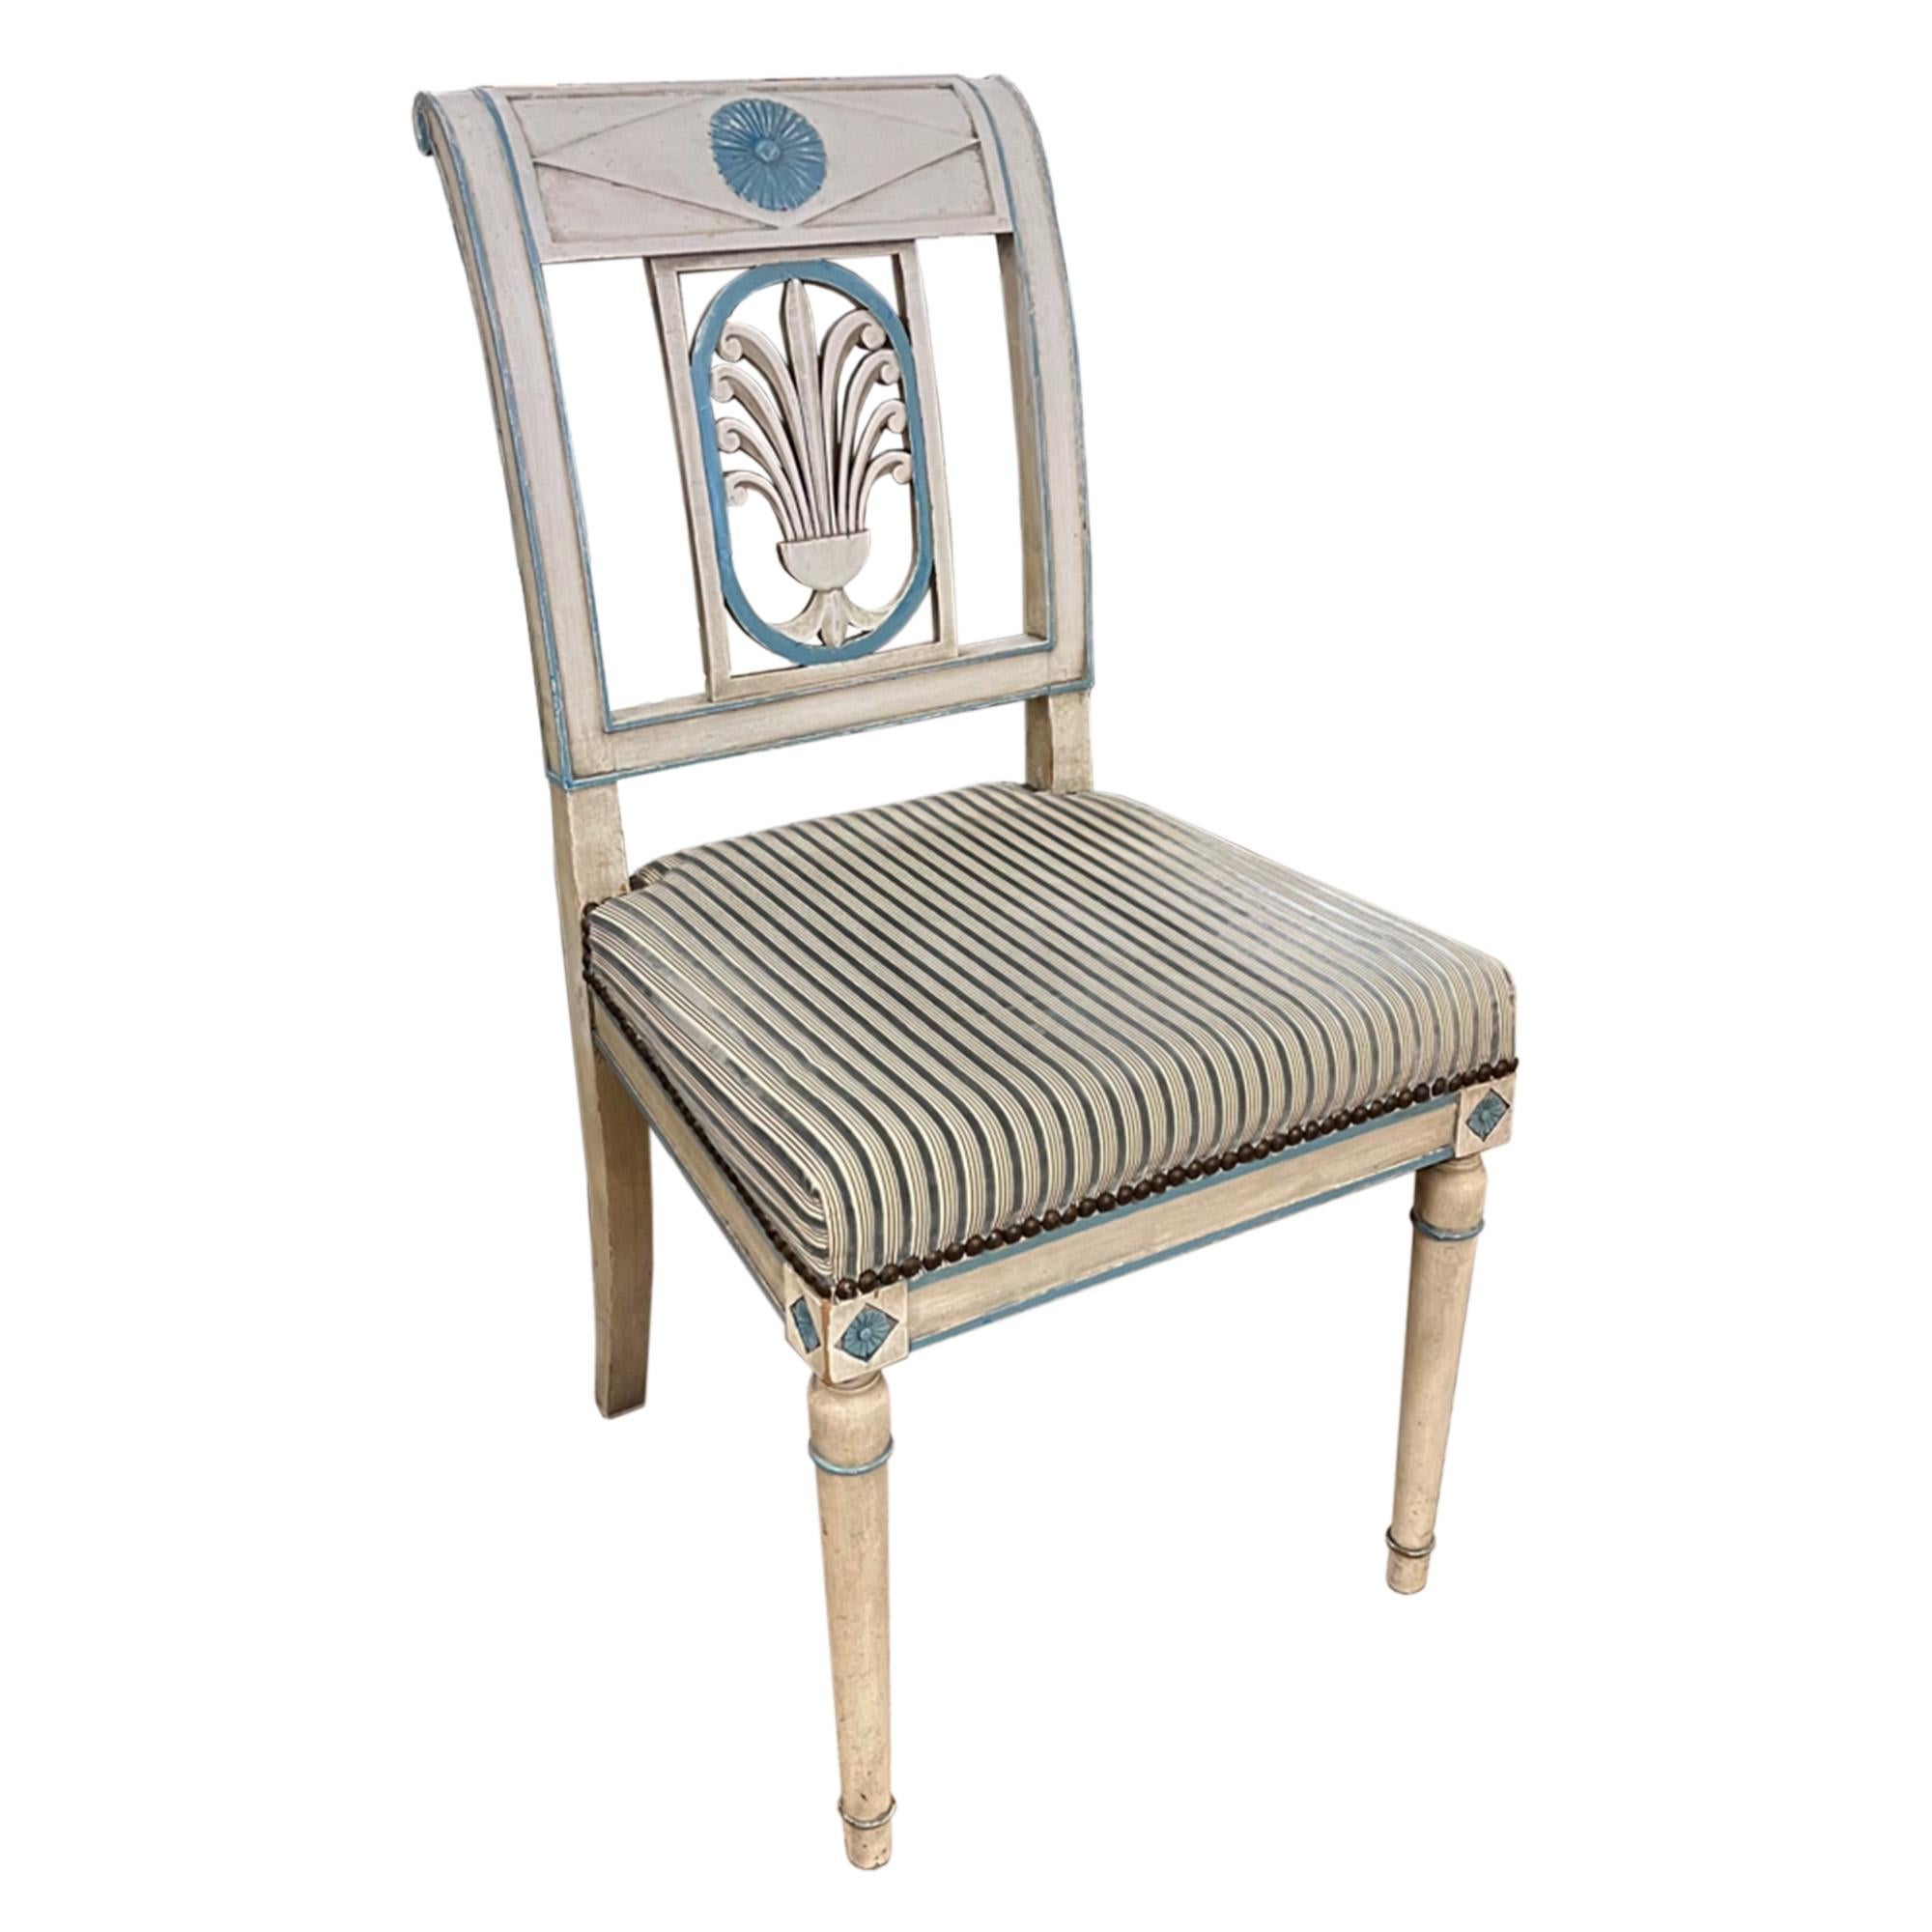 This is a very decorative set of French dining chairs. 

The attractive directoire design is accentuated with the original cream and pale blue original paint. Please take a look at all our pictures to see the floral and swirl decorations. The